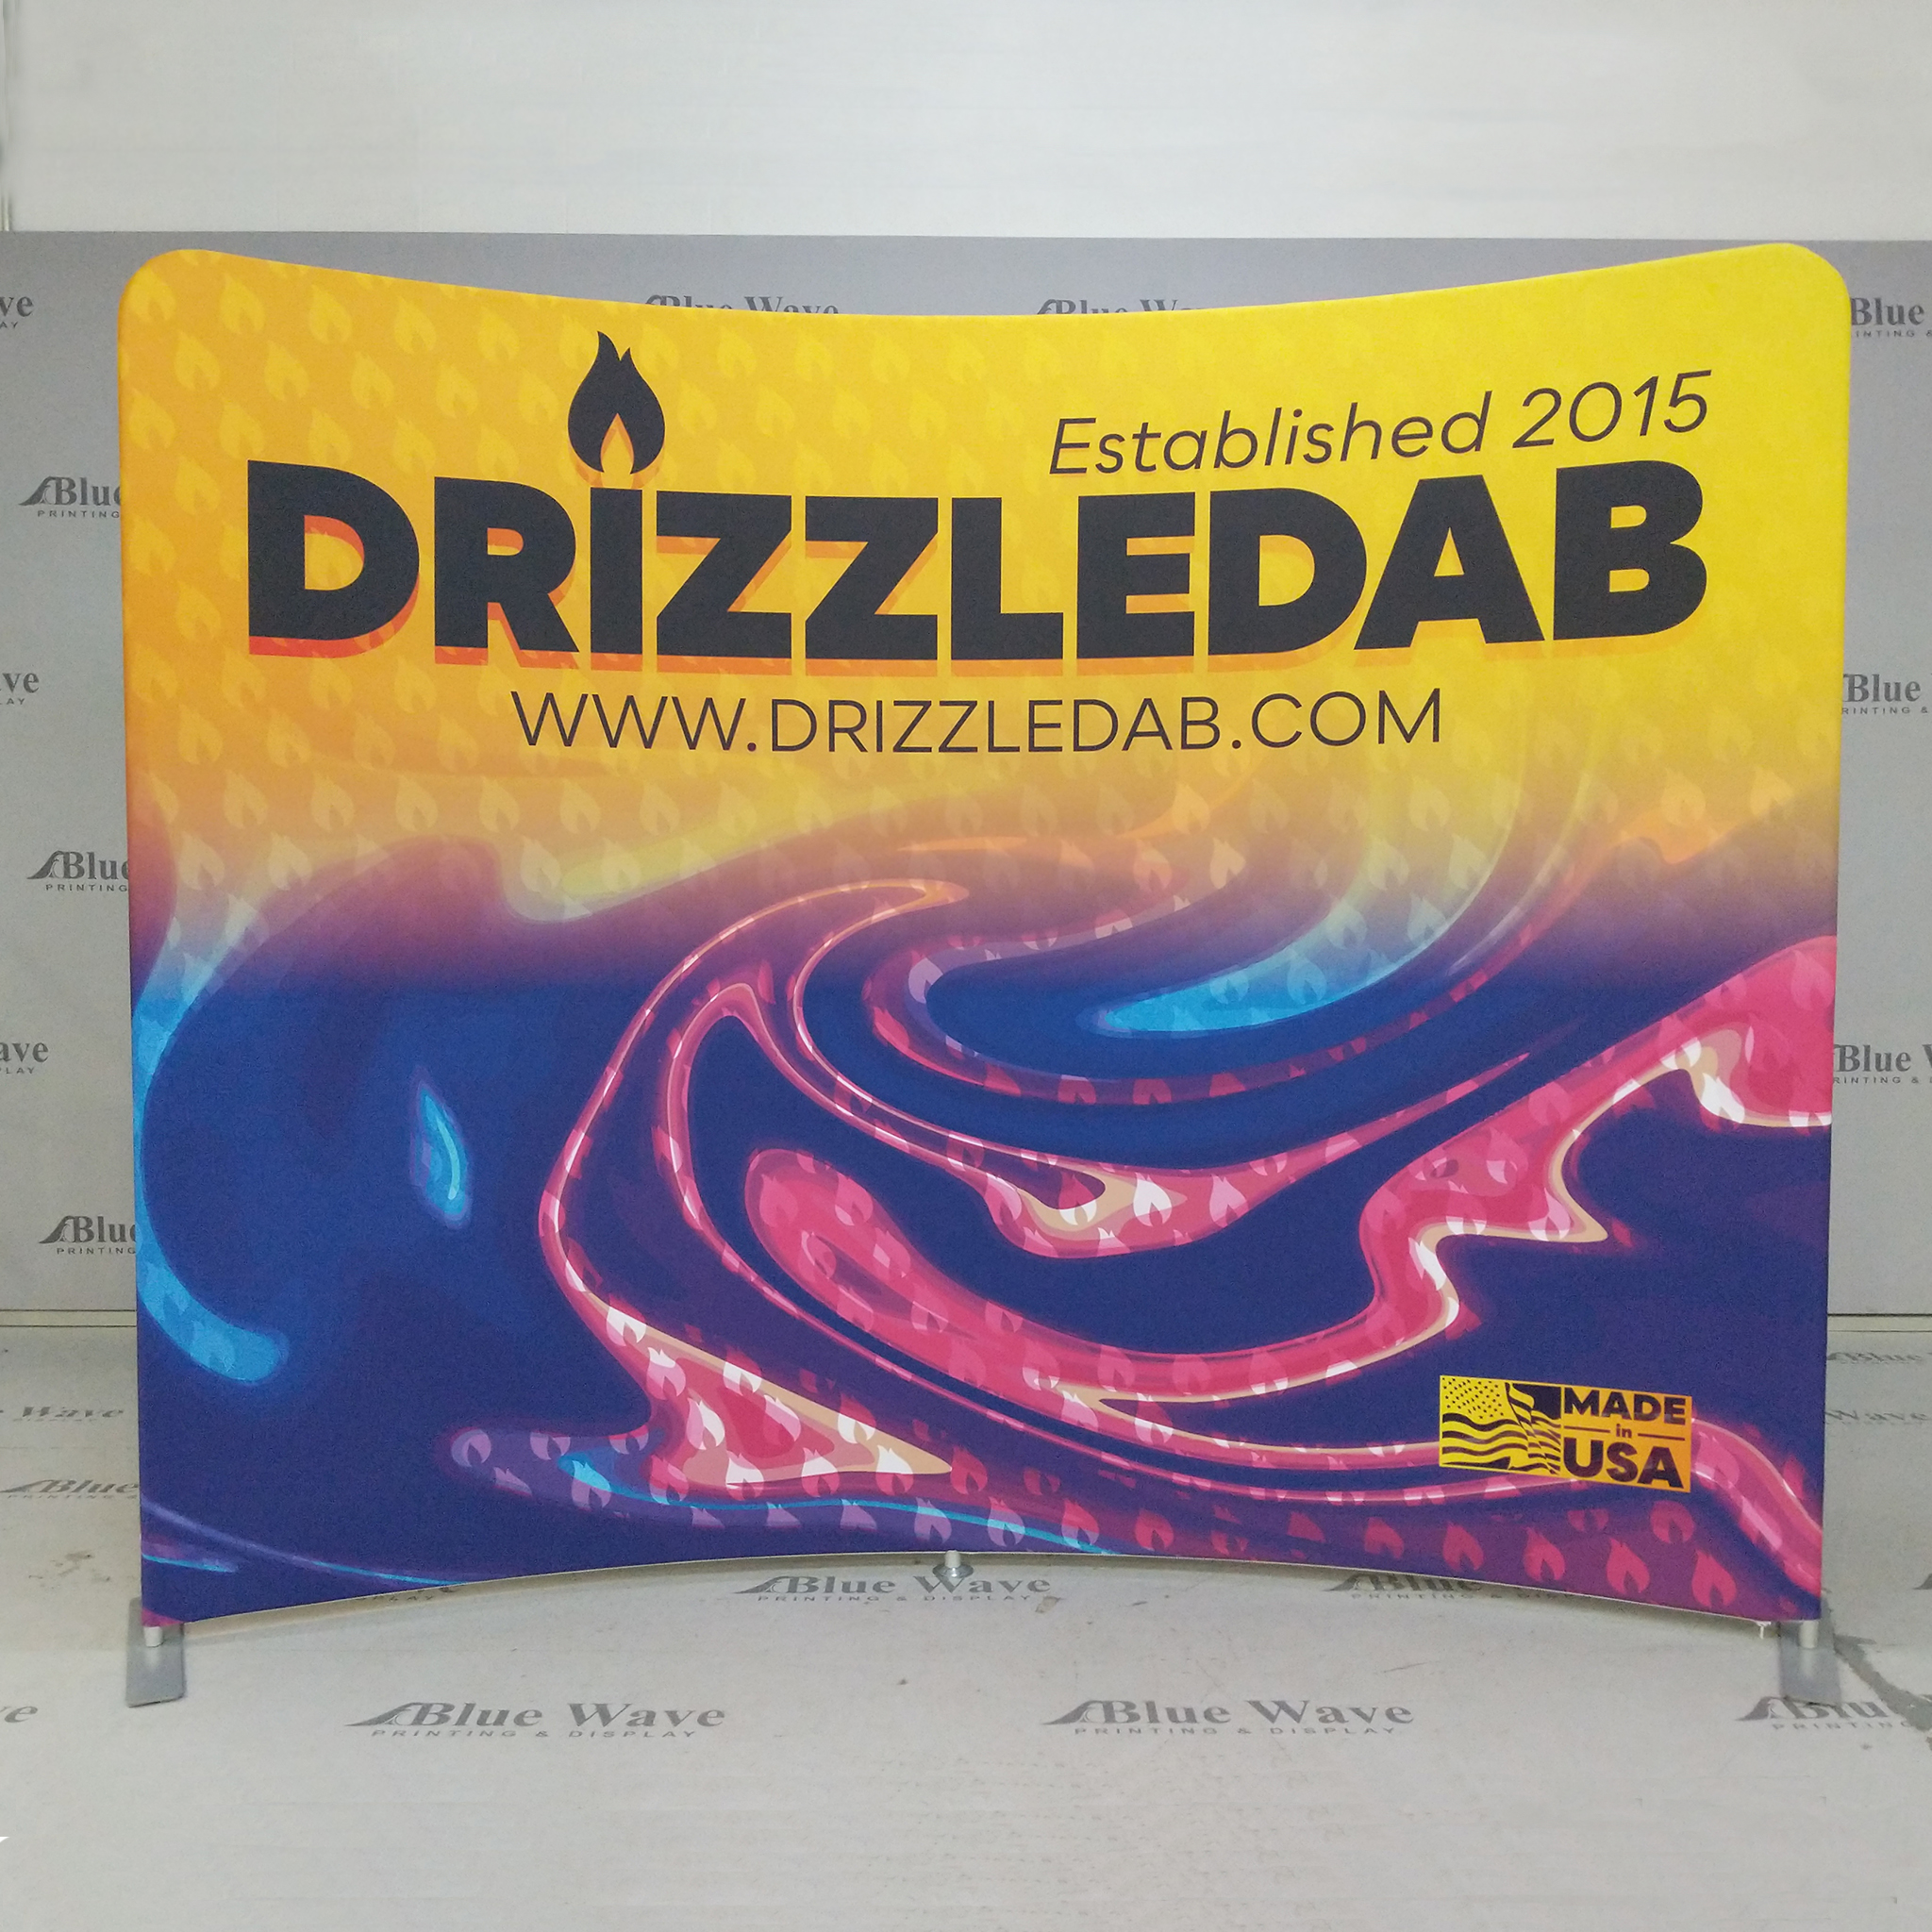 a trade show banner for the CBD manufacturing company Drizzle Dab